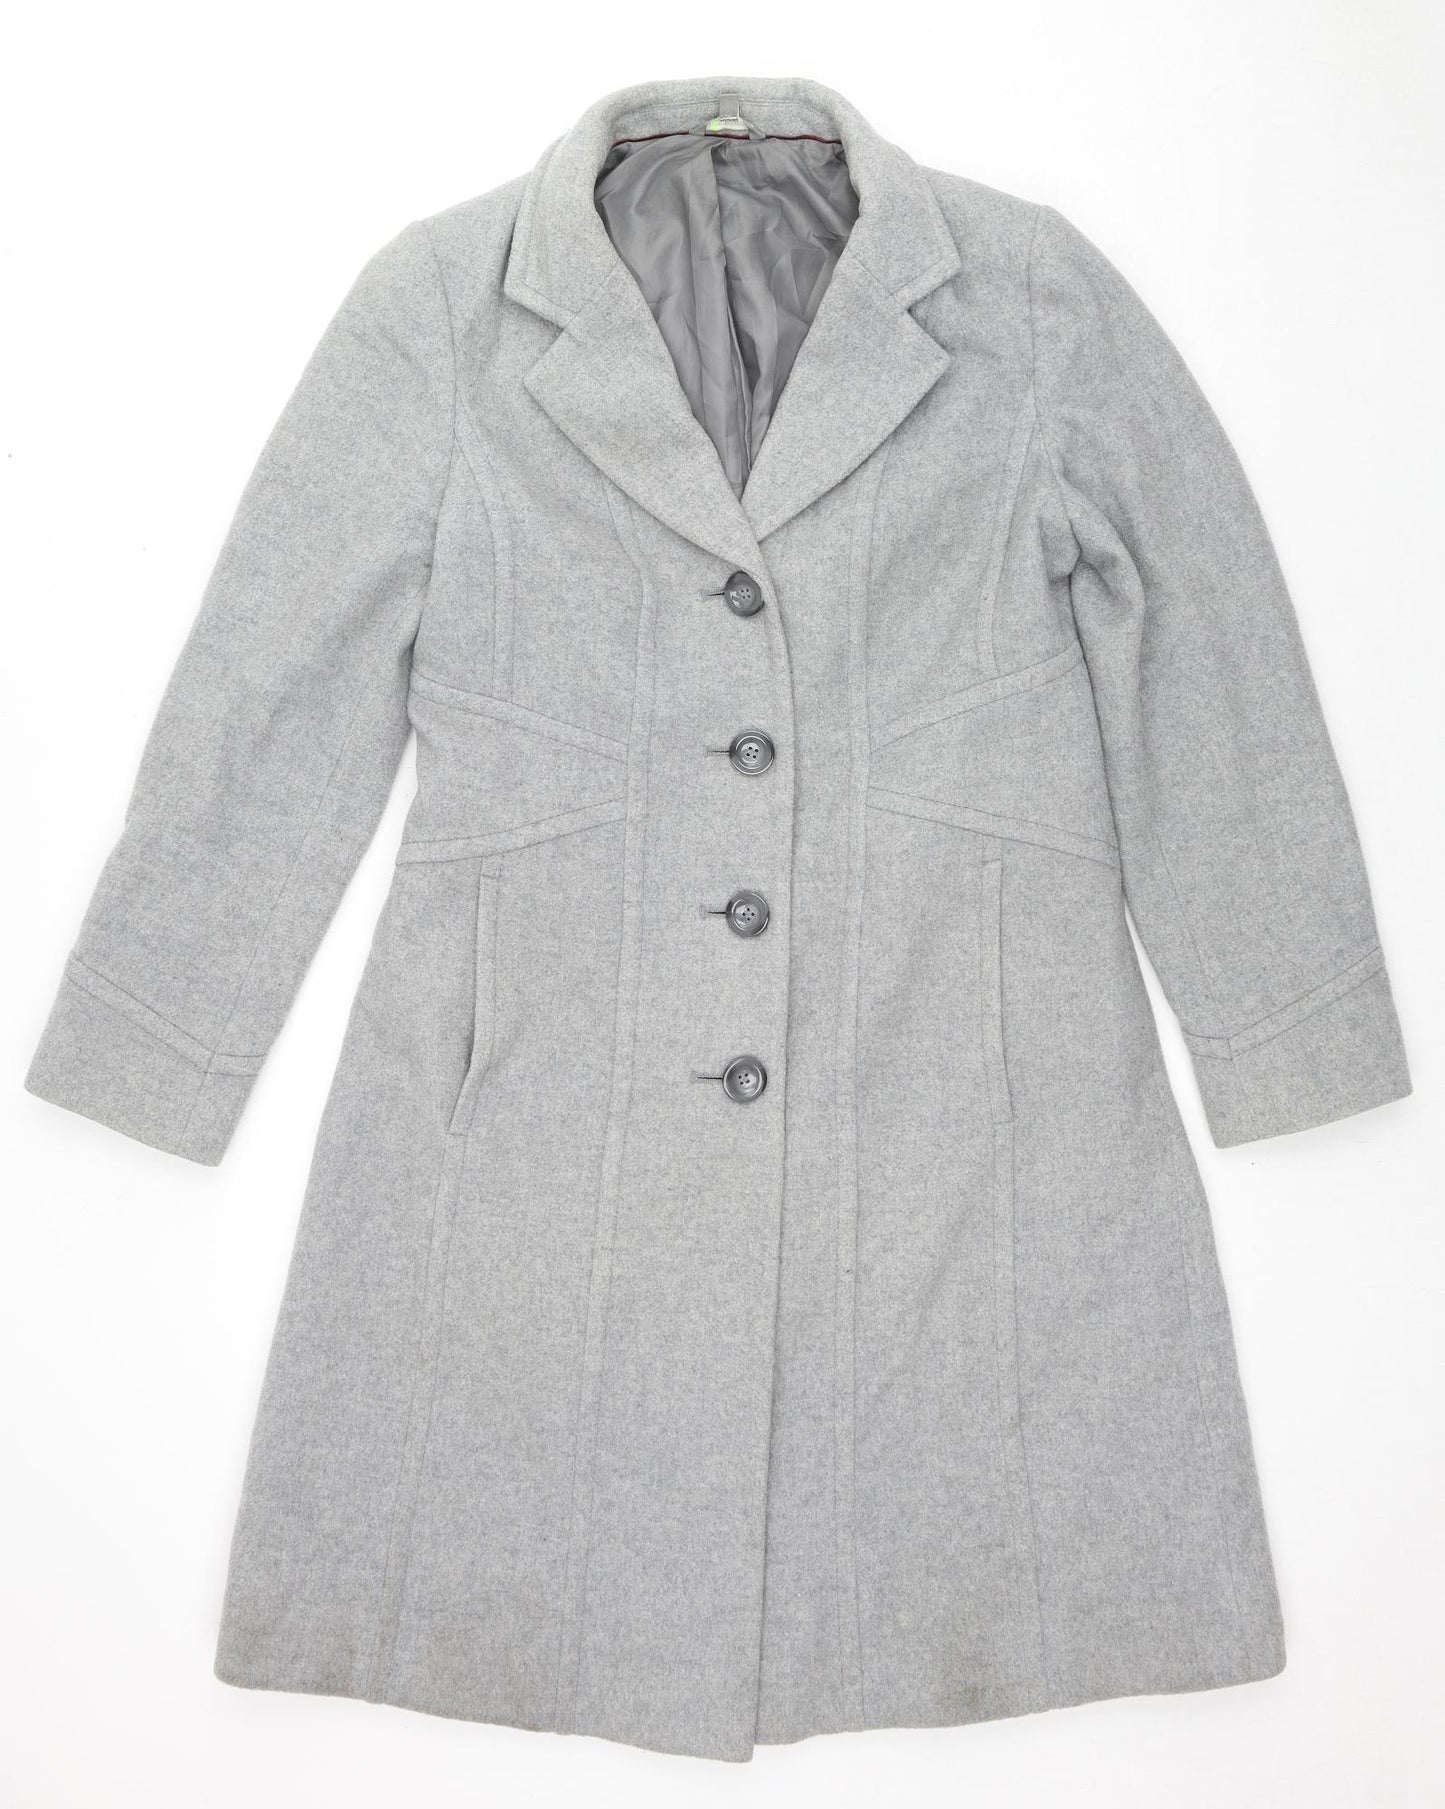 Marks and Spencer Womens Grey Overcoat Coat Size 10 Button